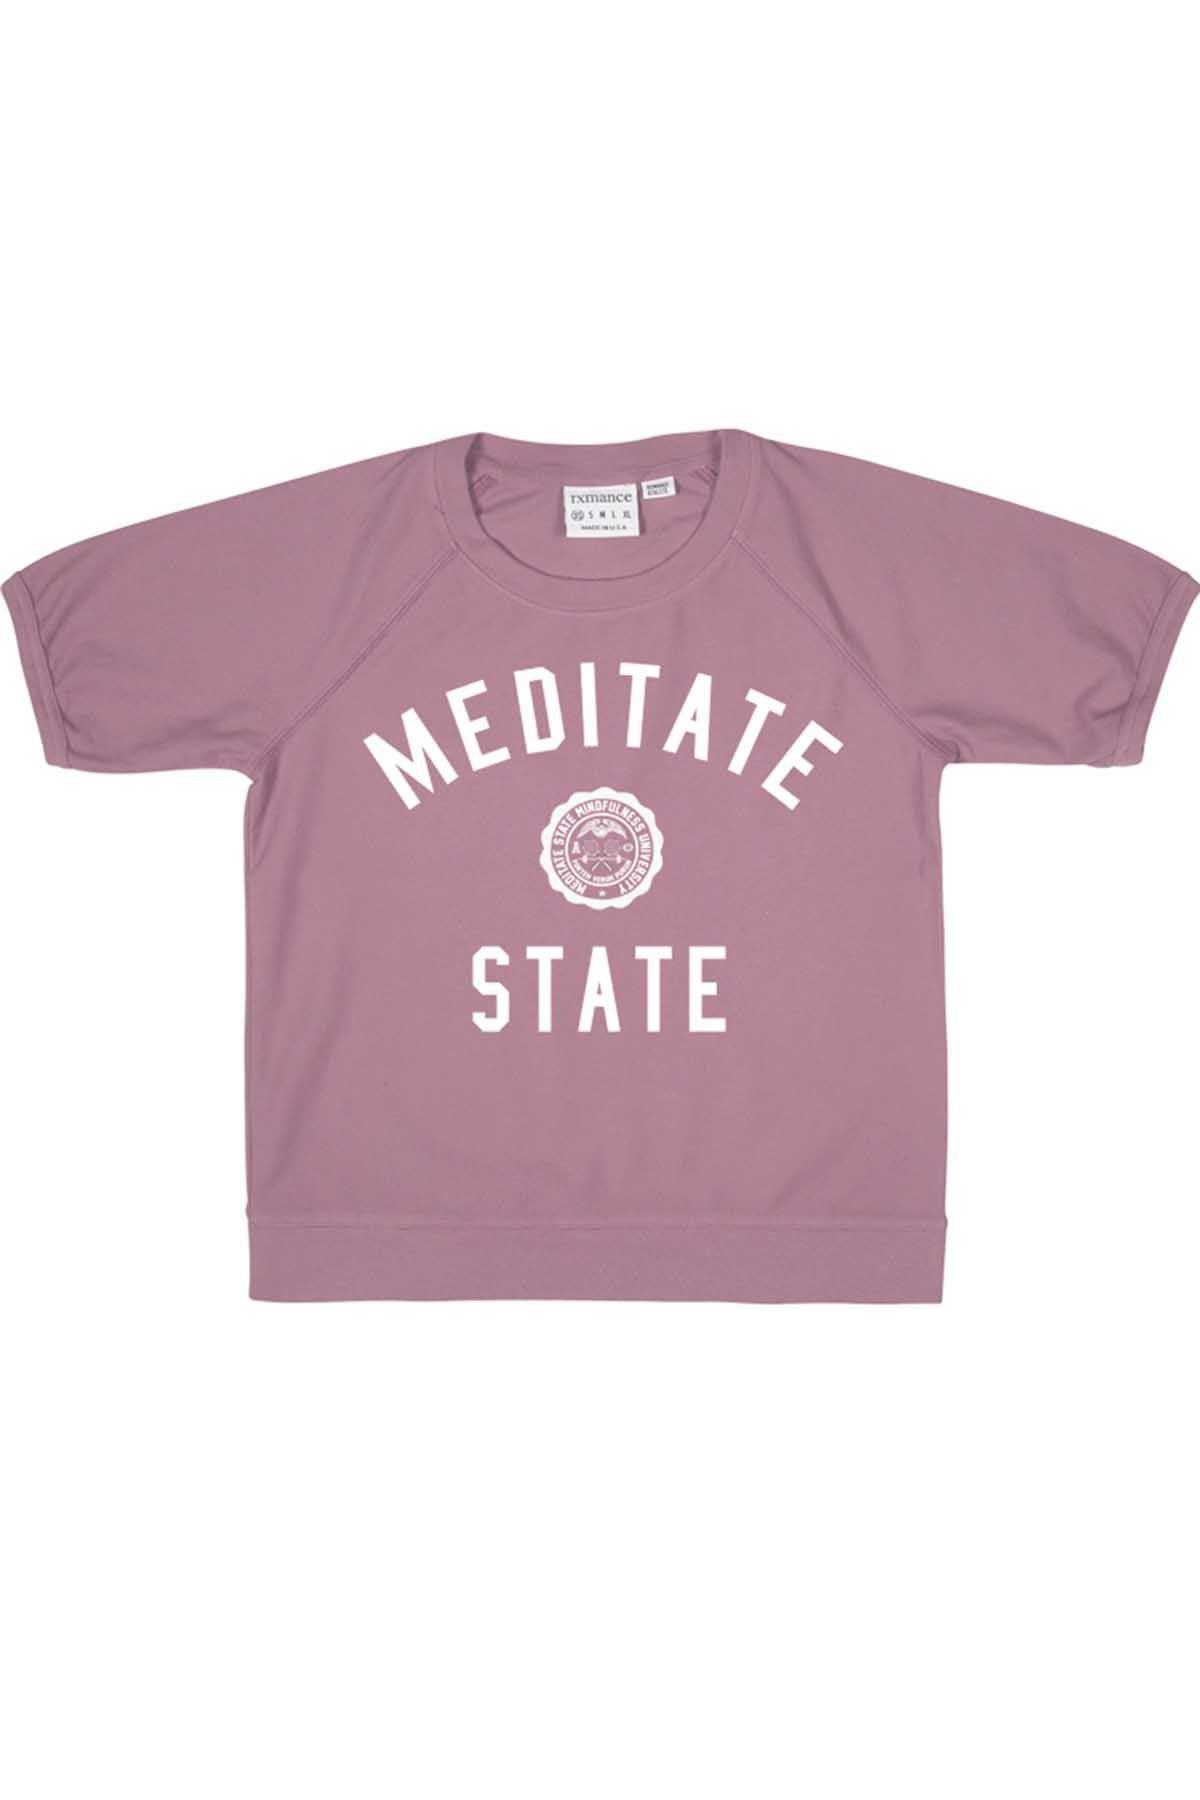 Rxmance Unisex Faded-Rose Meditate-State Loose-Knit Short-Sleeve Tee